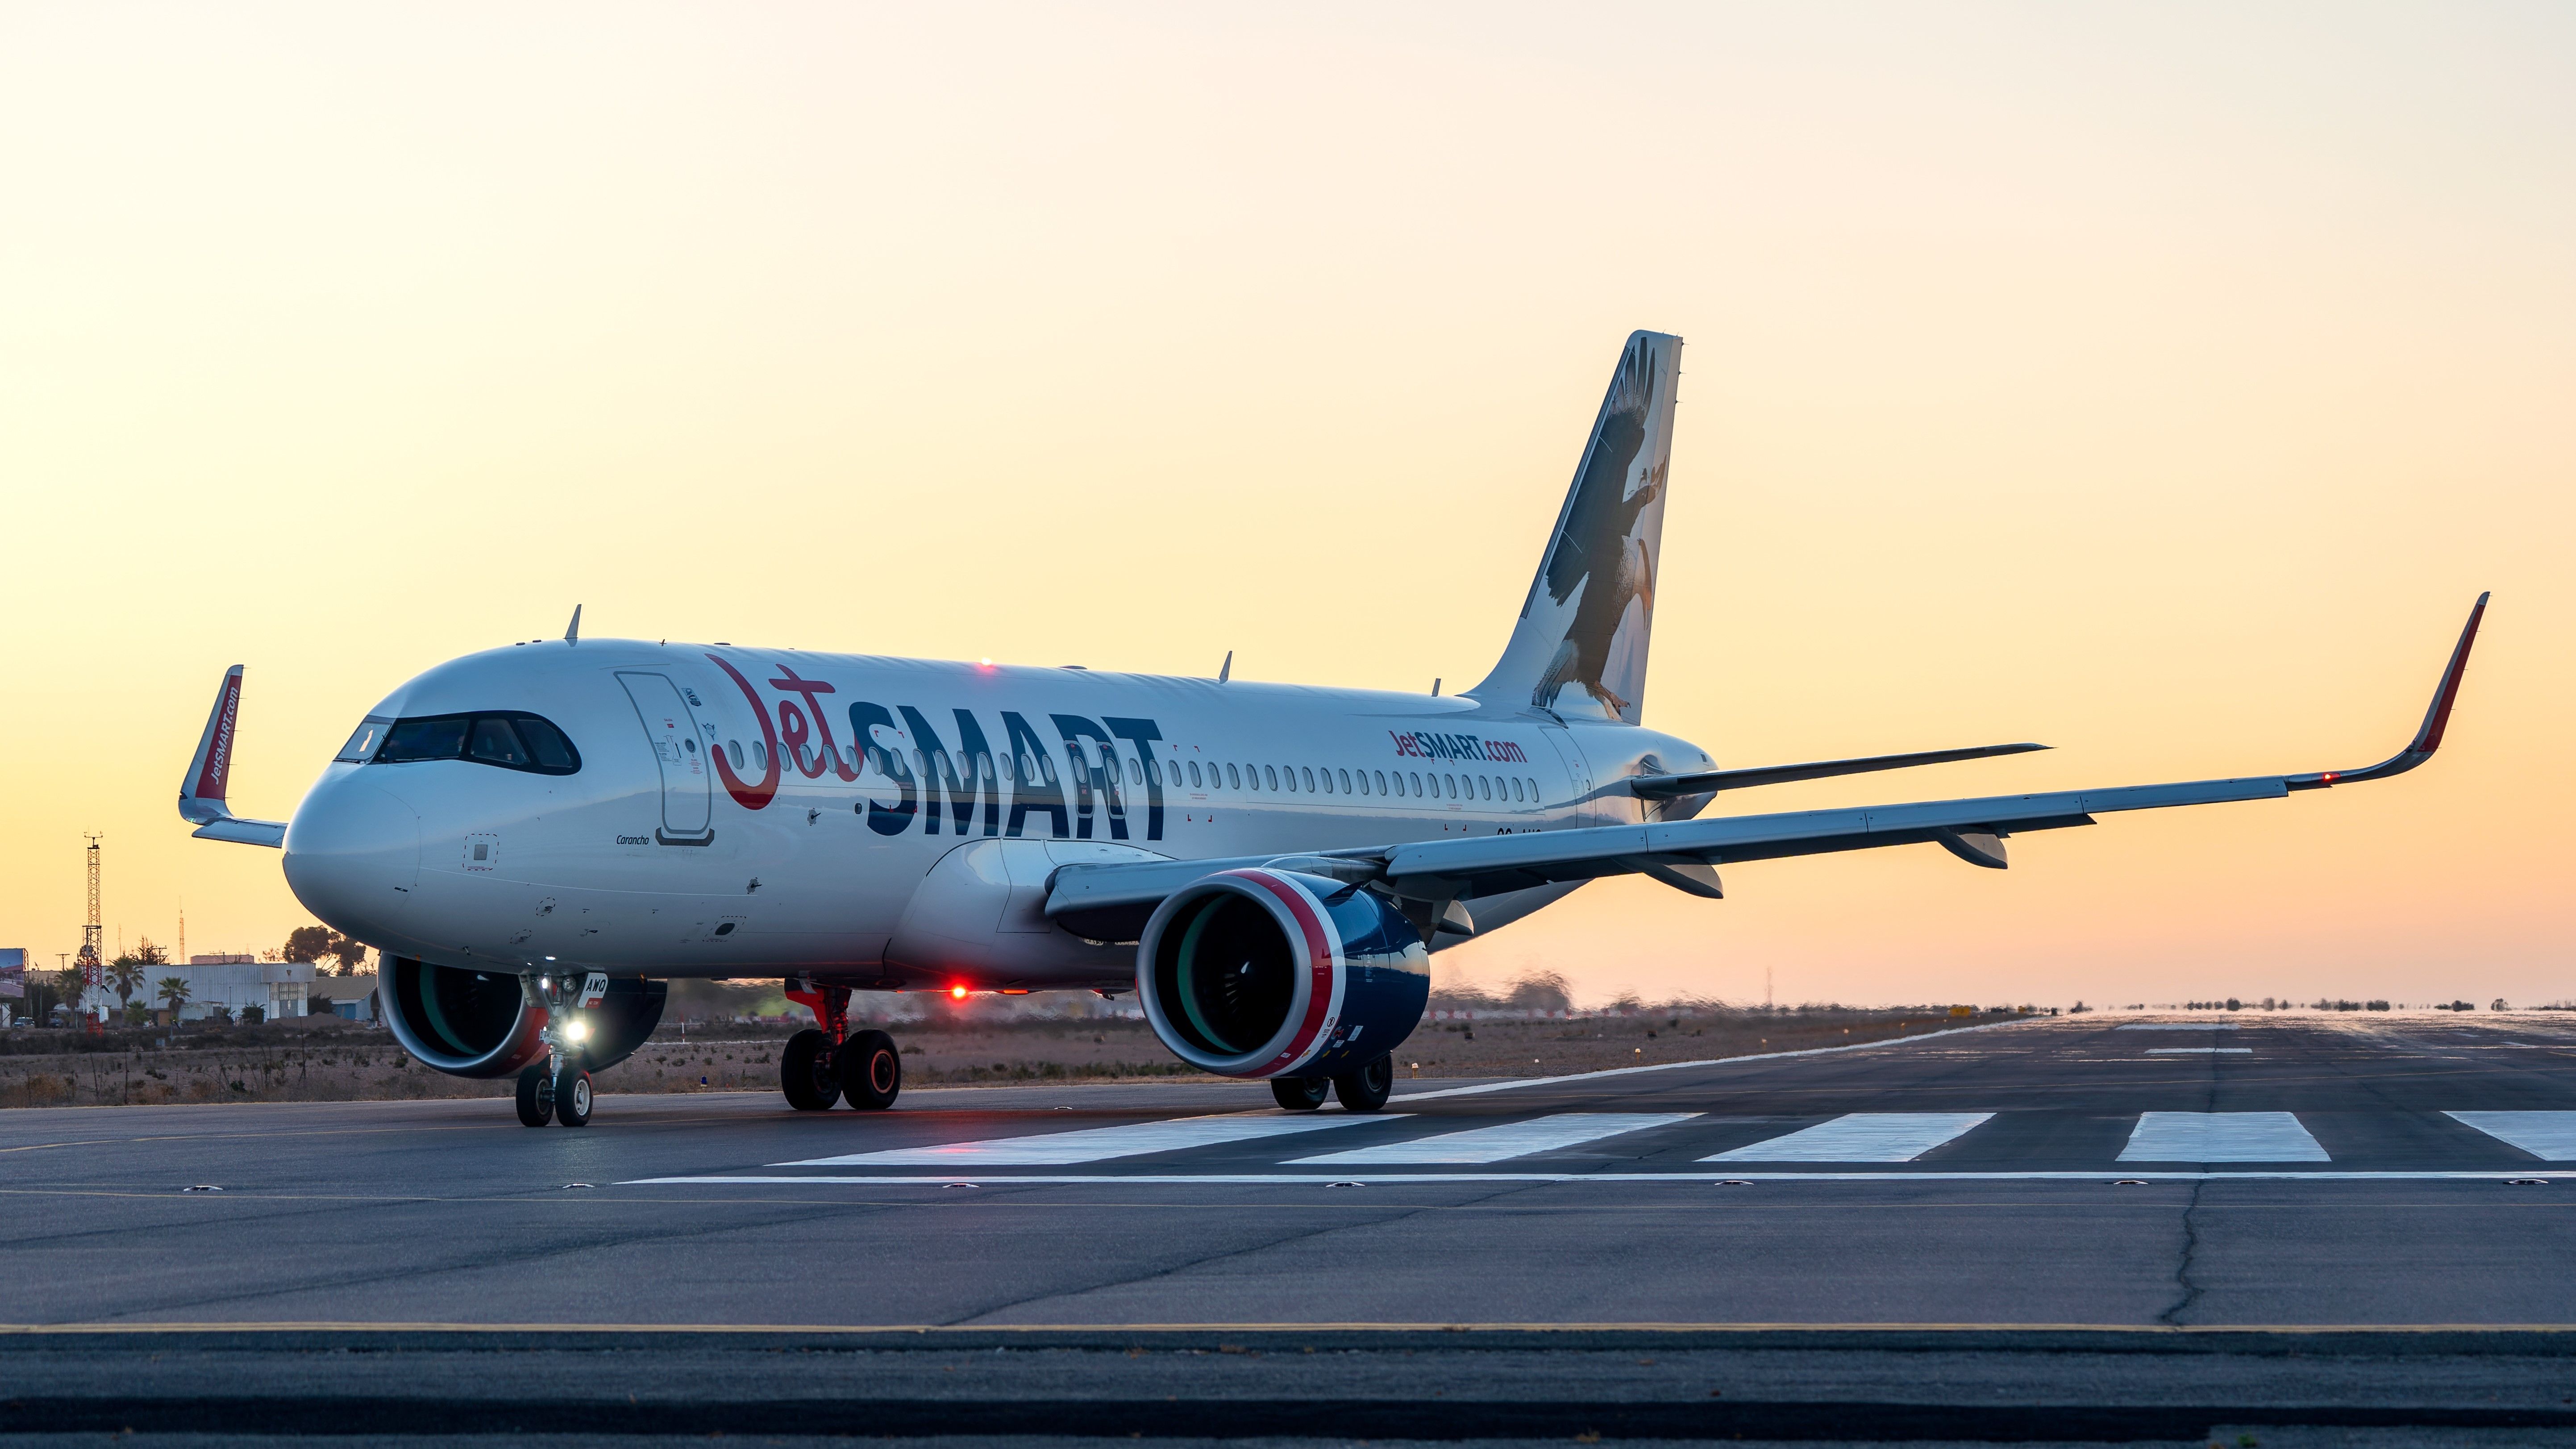 La Serena, Coquimbo region, Chile, 22 of February, 2022. JetSmart Airbus A320 commercial aircraft in the airport